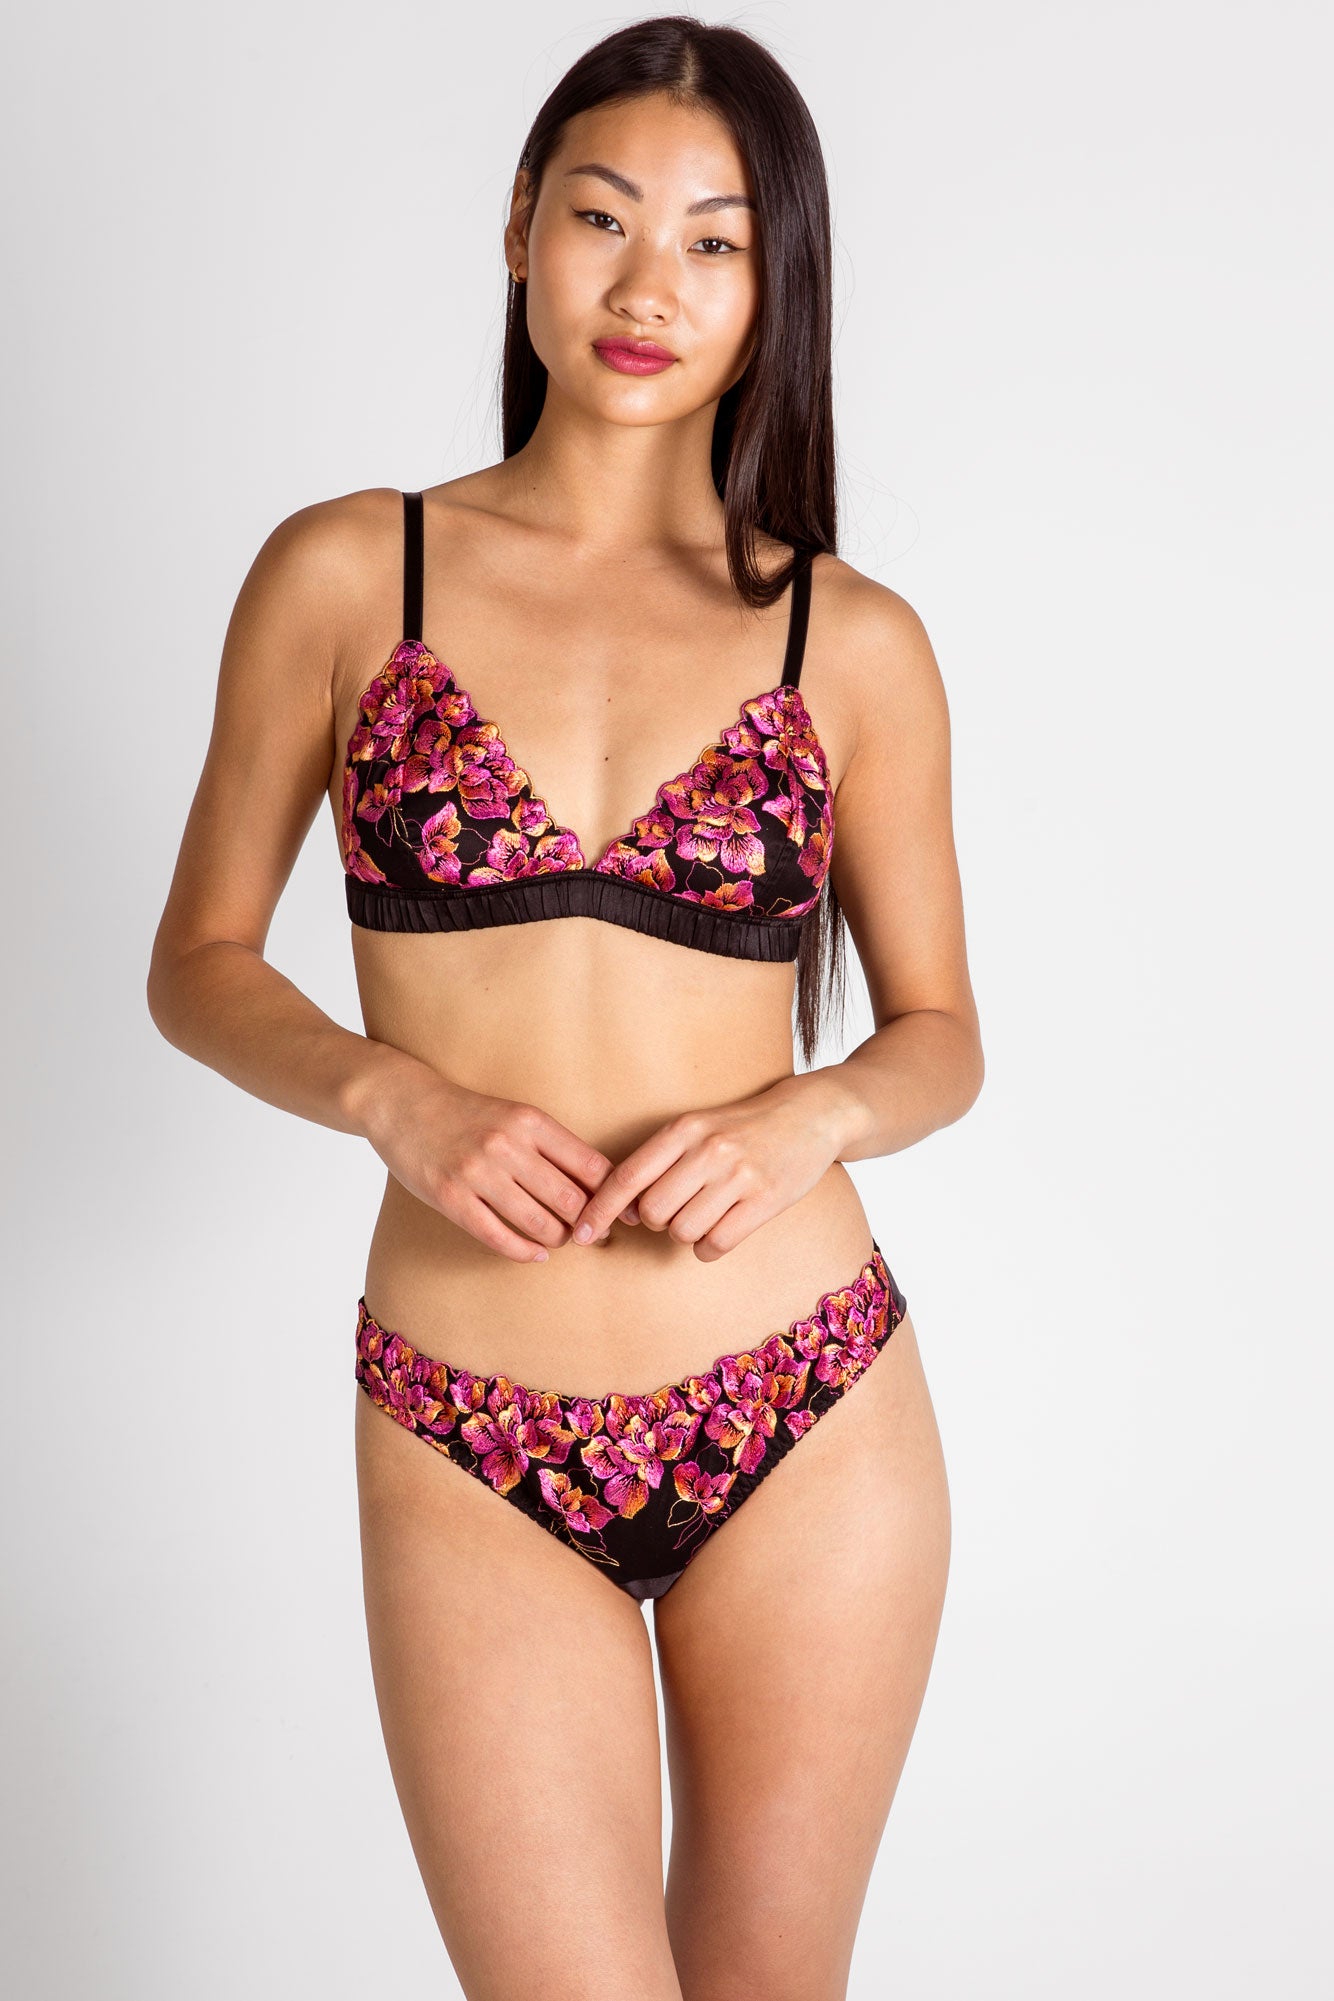 Gemma floral knickers  Luxury, real silk lingerie sets